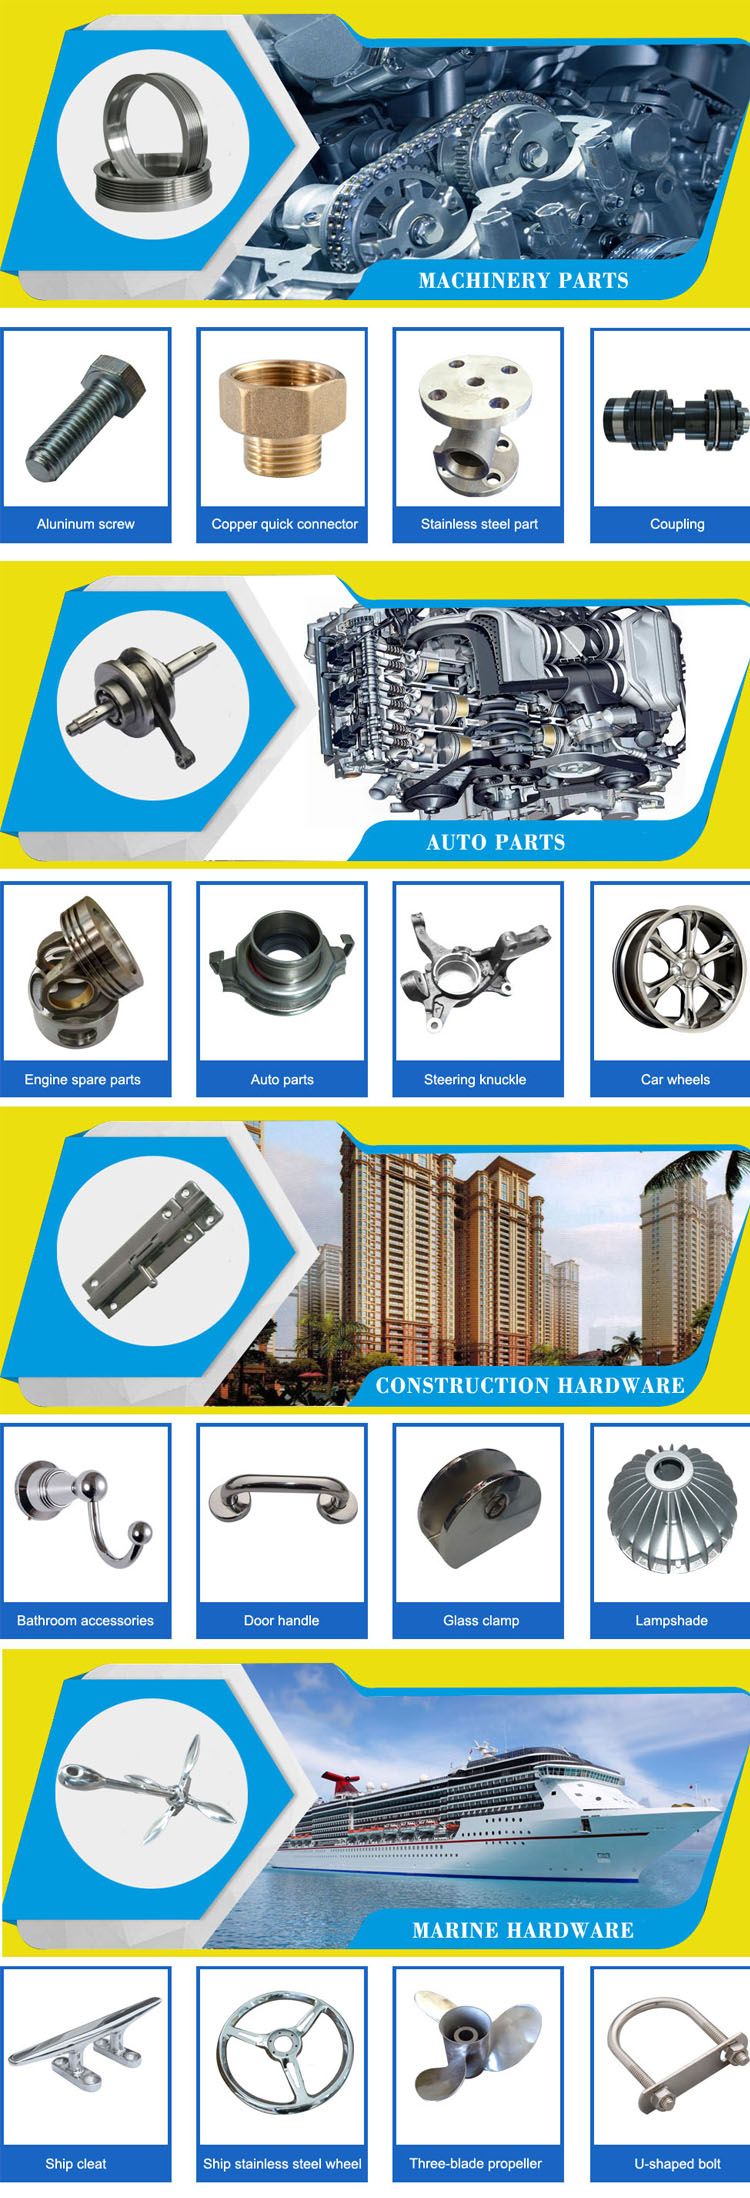 Foundry OEM investment casting Customized stainless aluminum iron parts for machinery engines